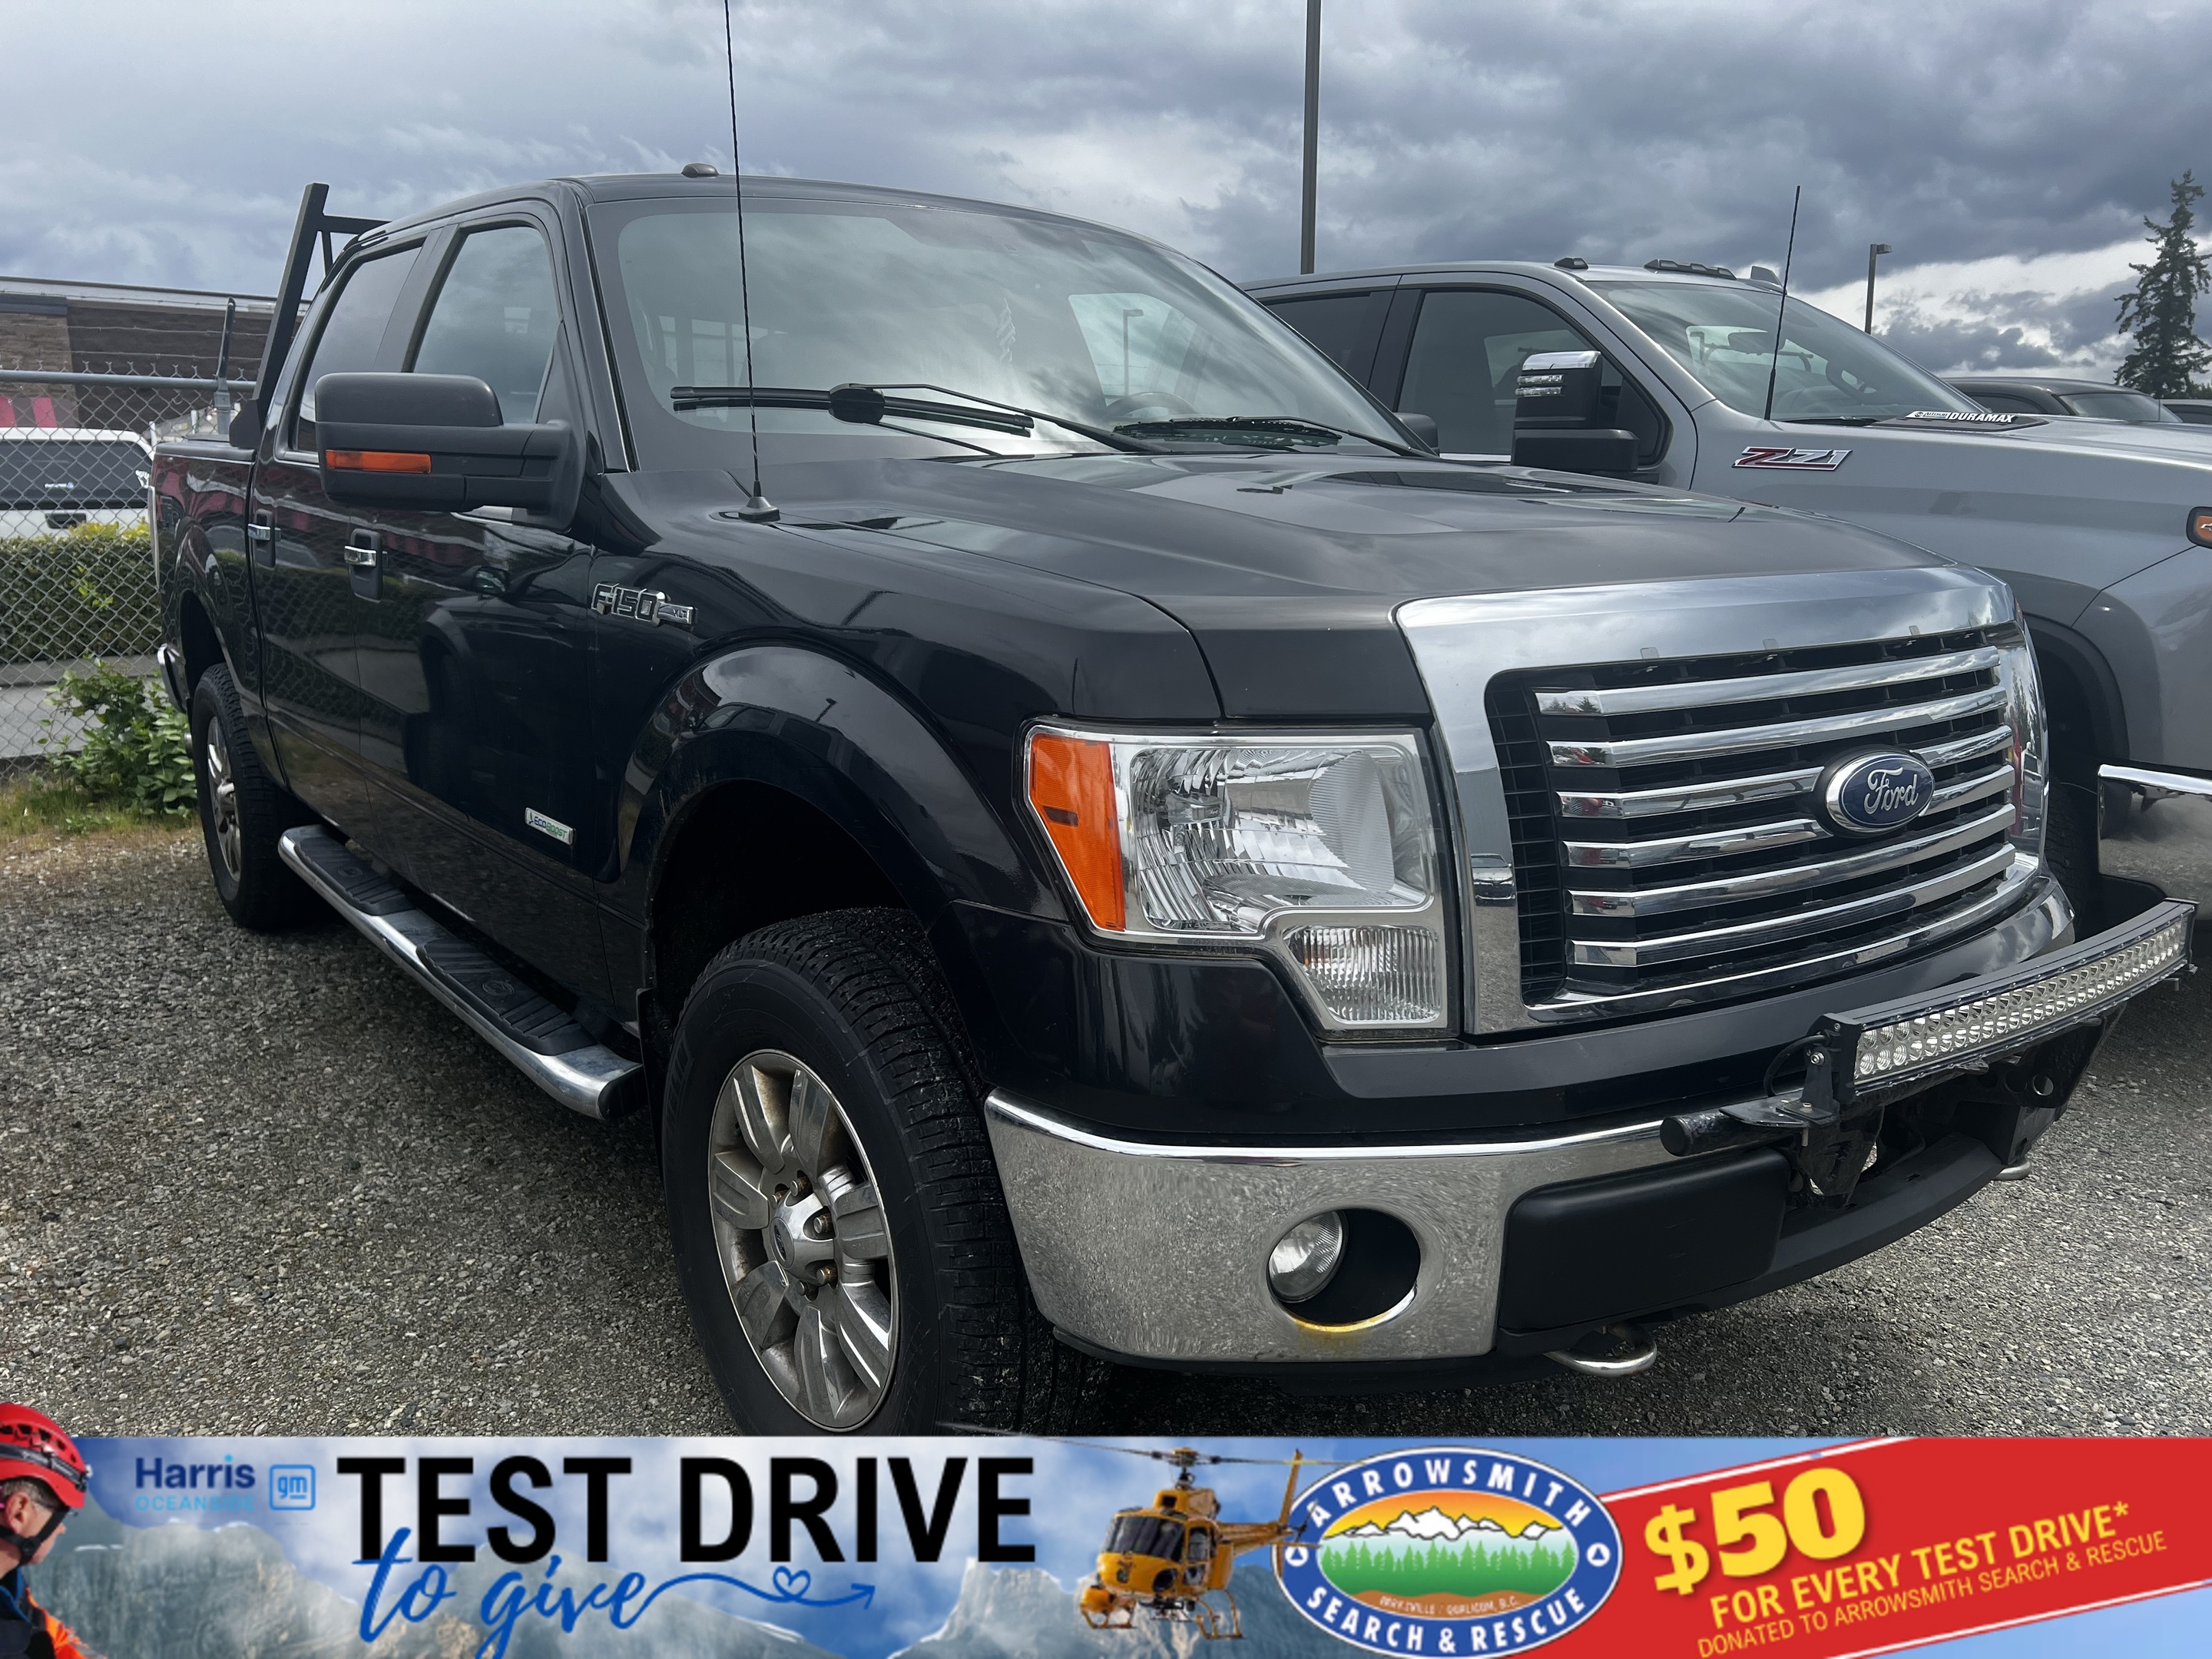 2012 Ford F-150 | 4x4 | SuperCrew | Towing | Cruise | 